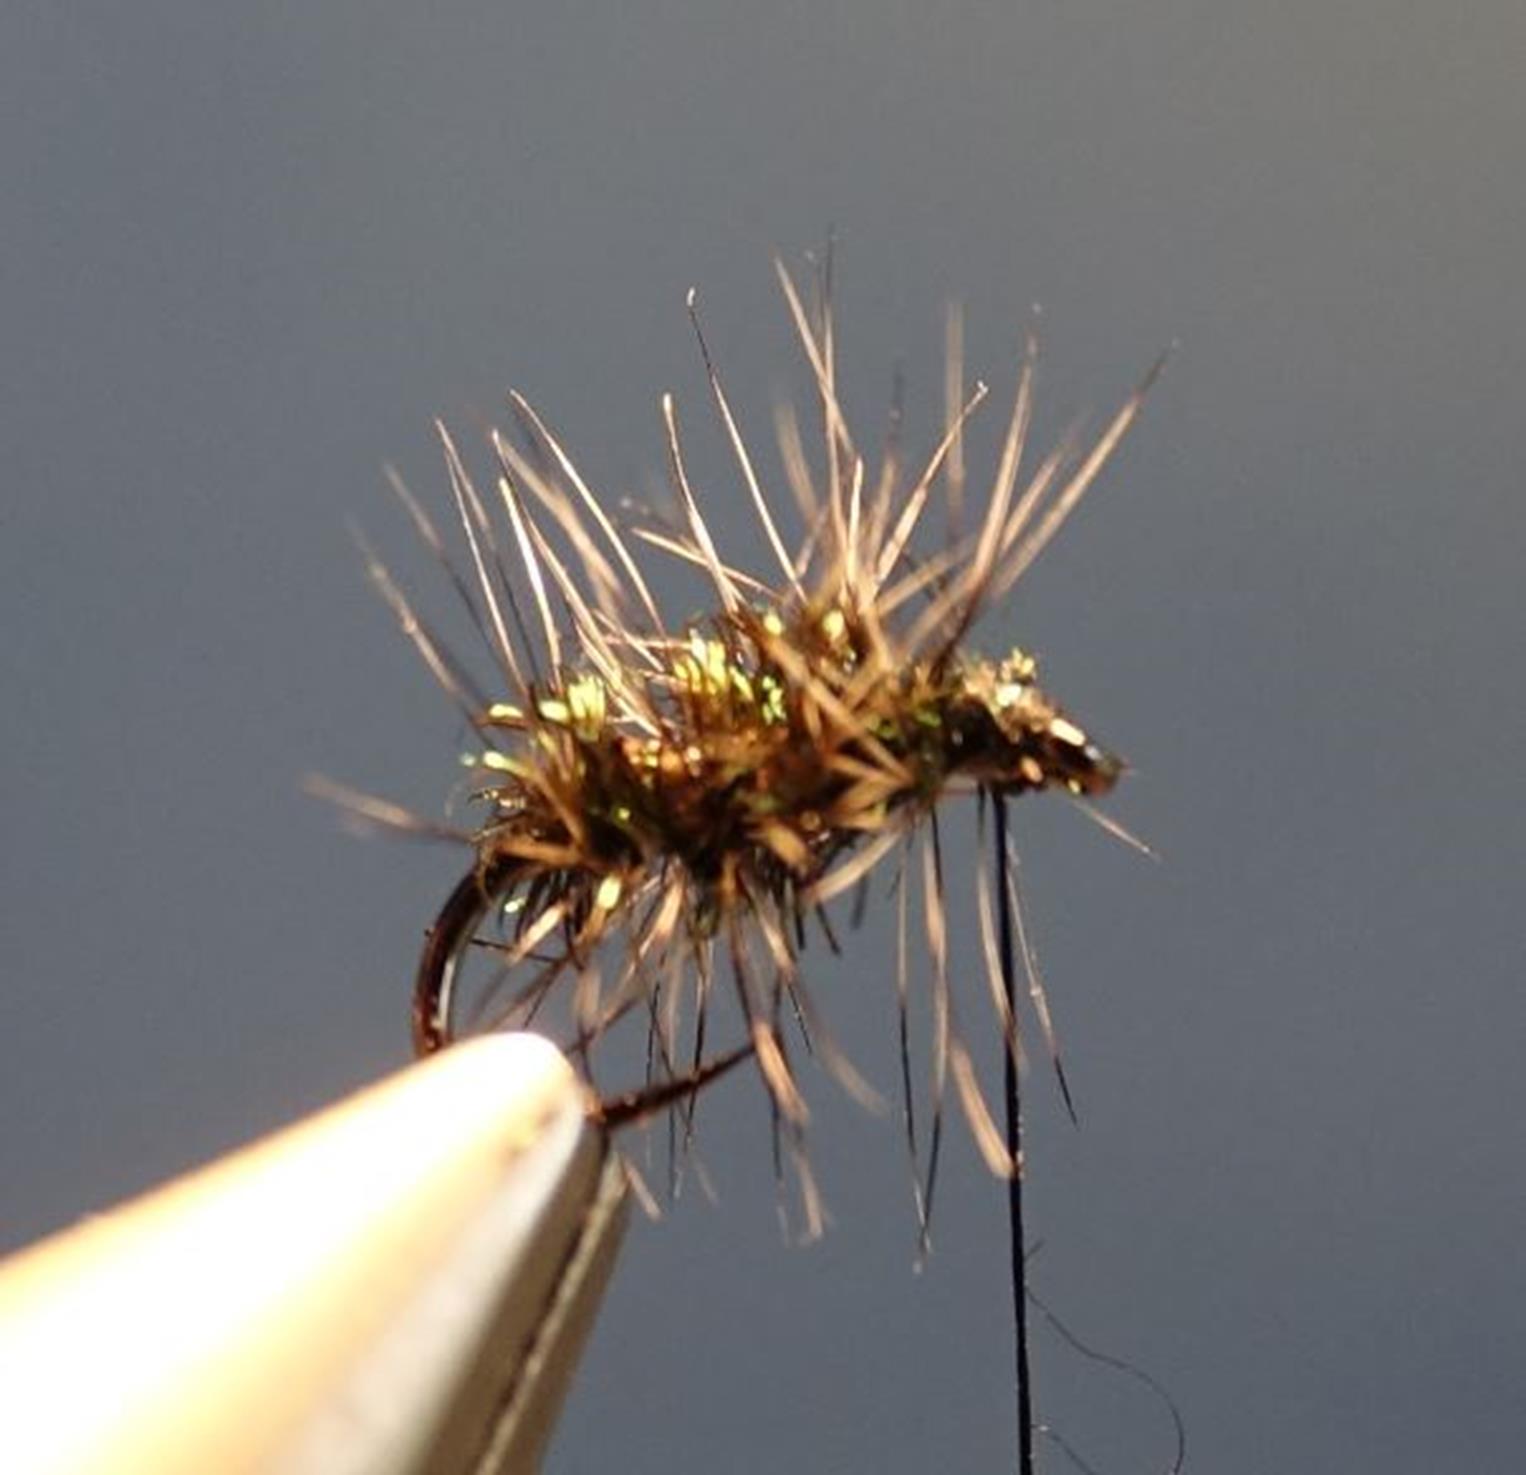 Gnat herl paon hackle grizzly mouche fly tying eclosion